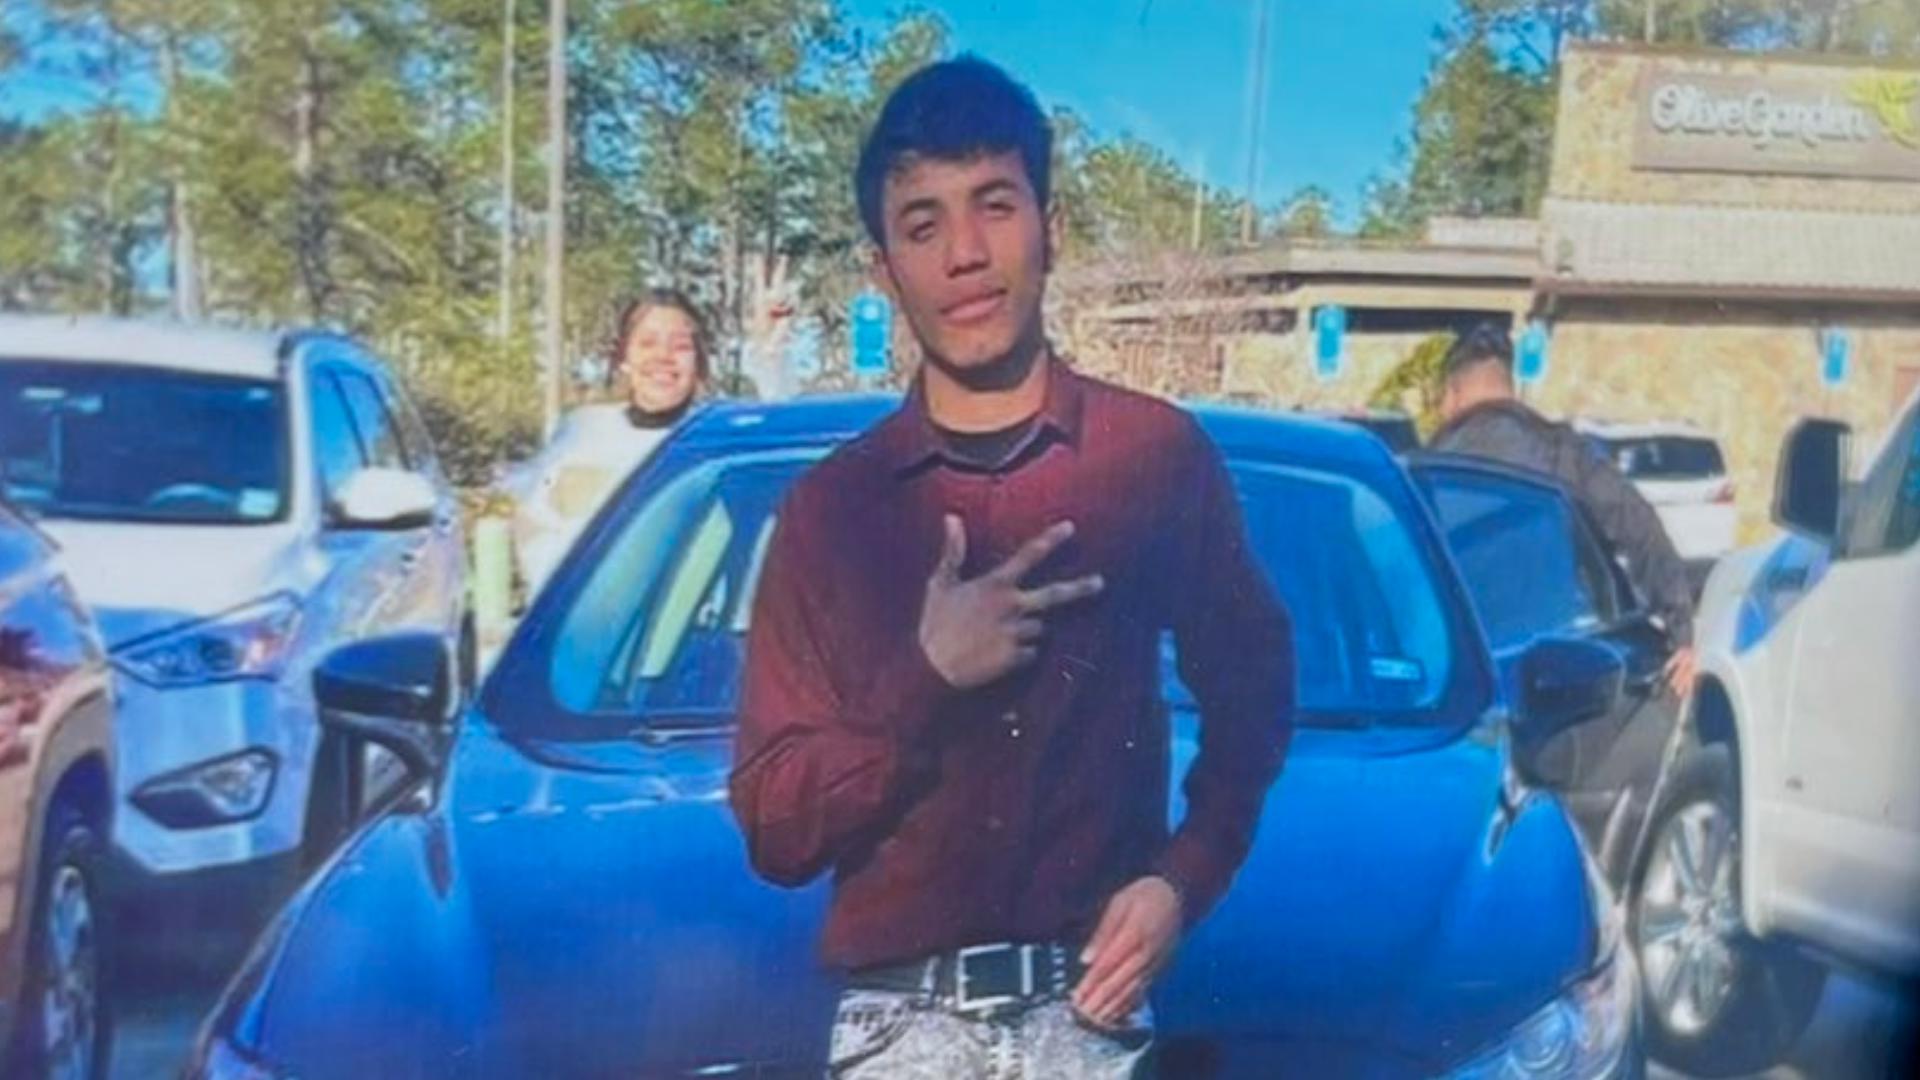 State police identified the student as 18-year-old Helgin Guerra Flores of Slidell.